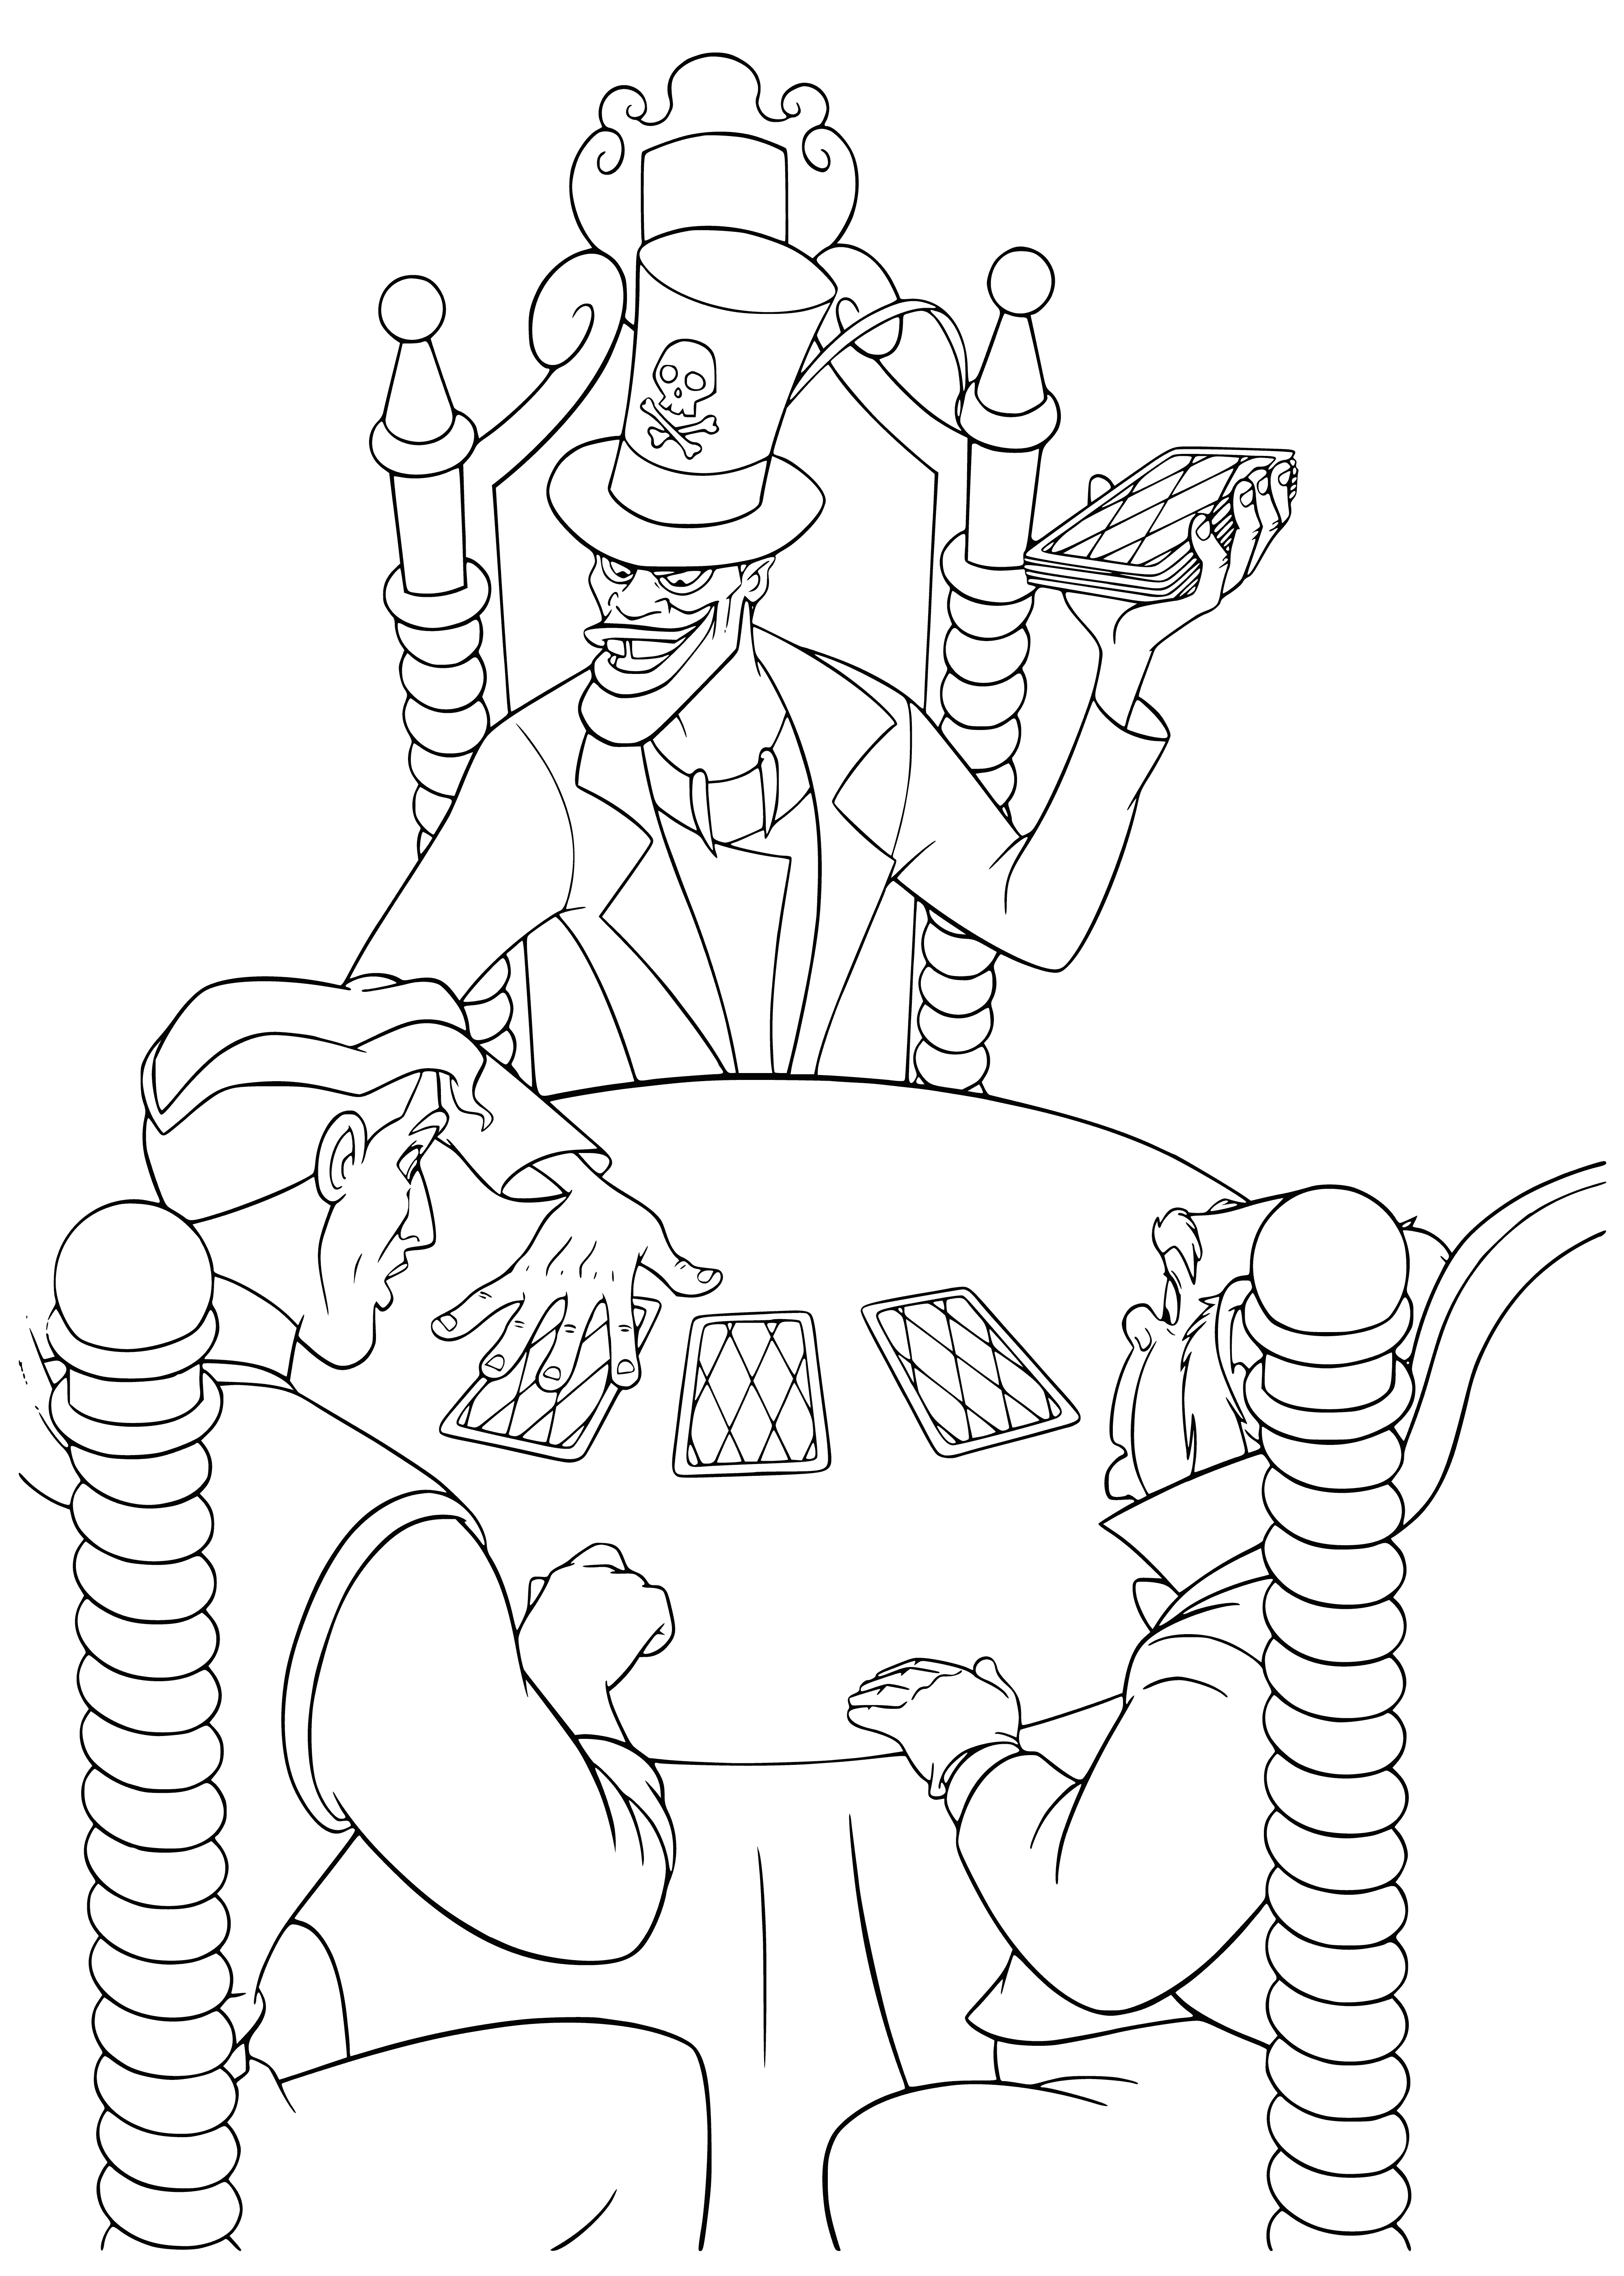 Shadow Man, Prince Navin and Lorenz coloring page